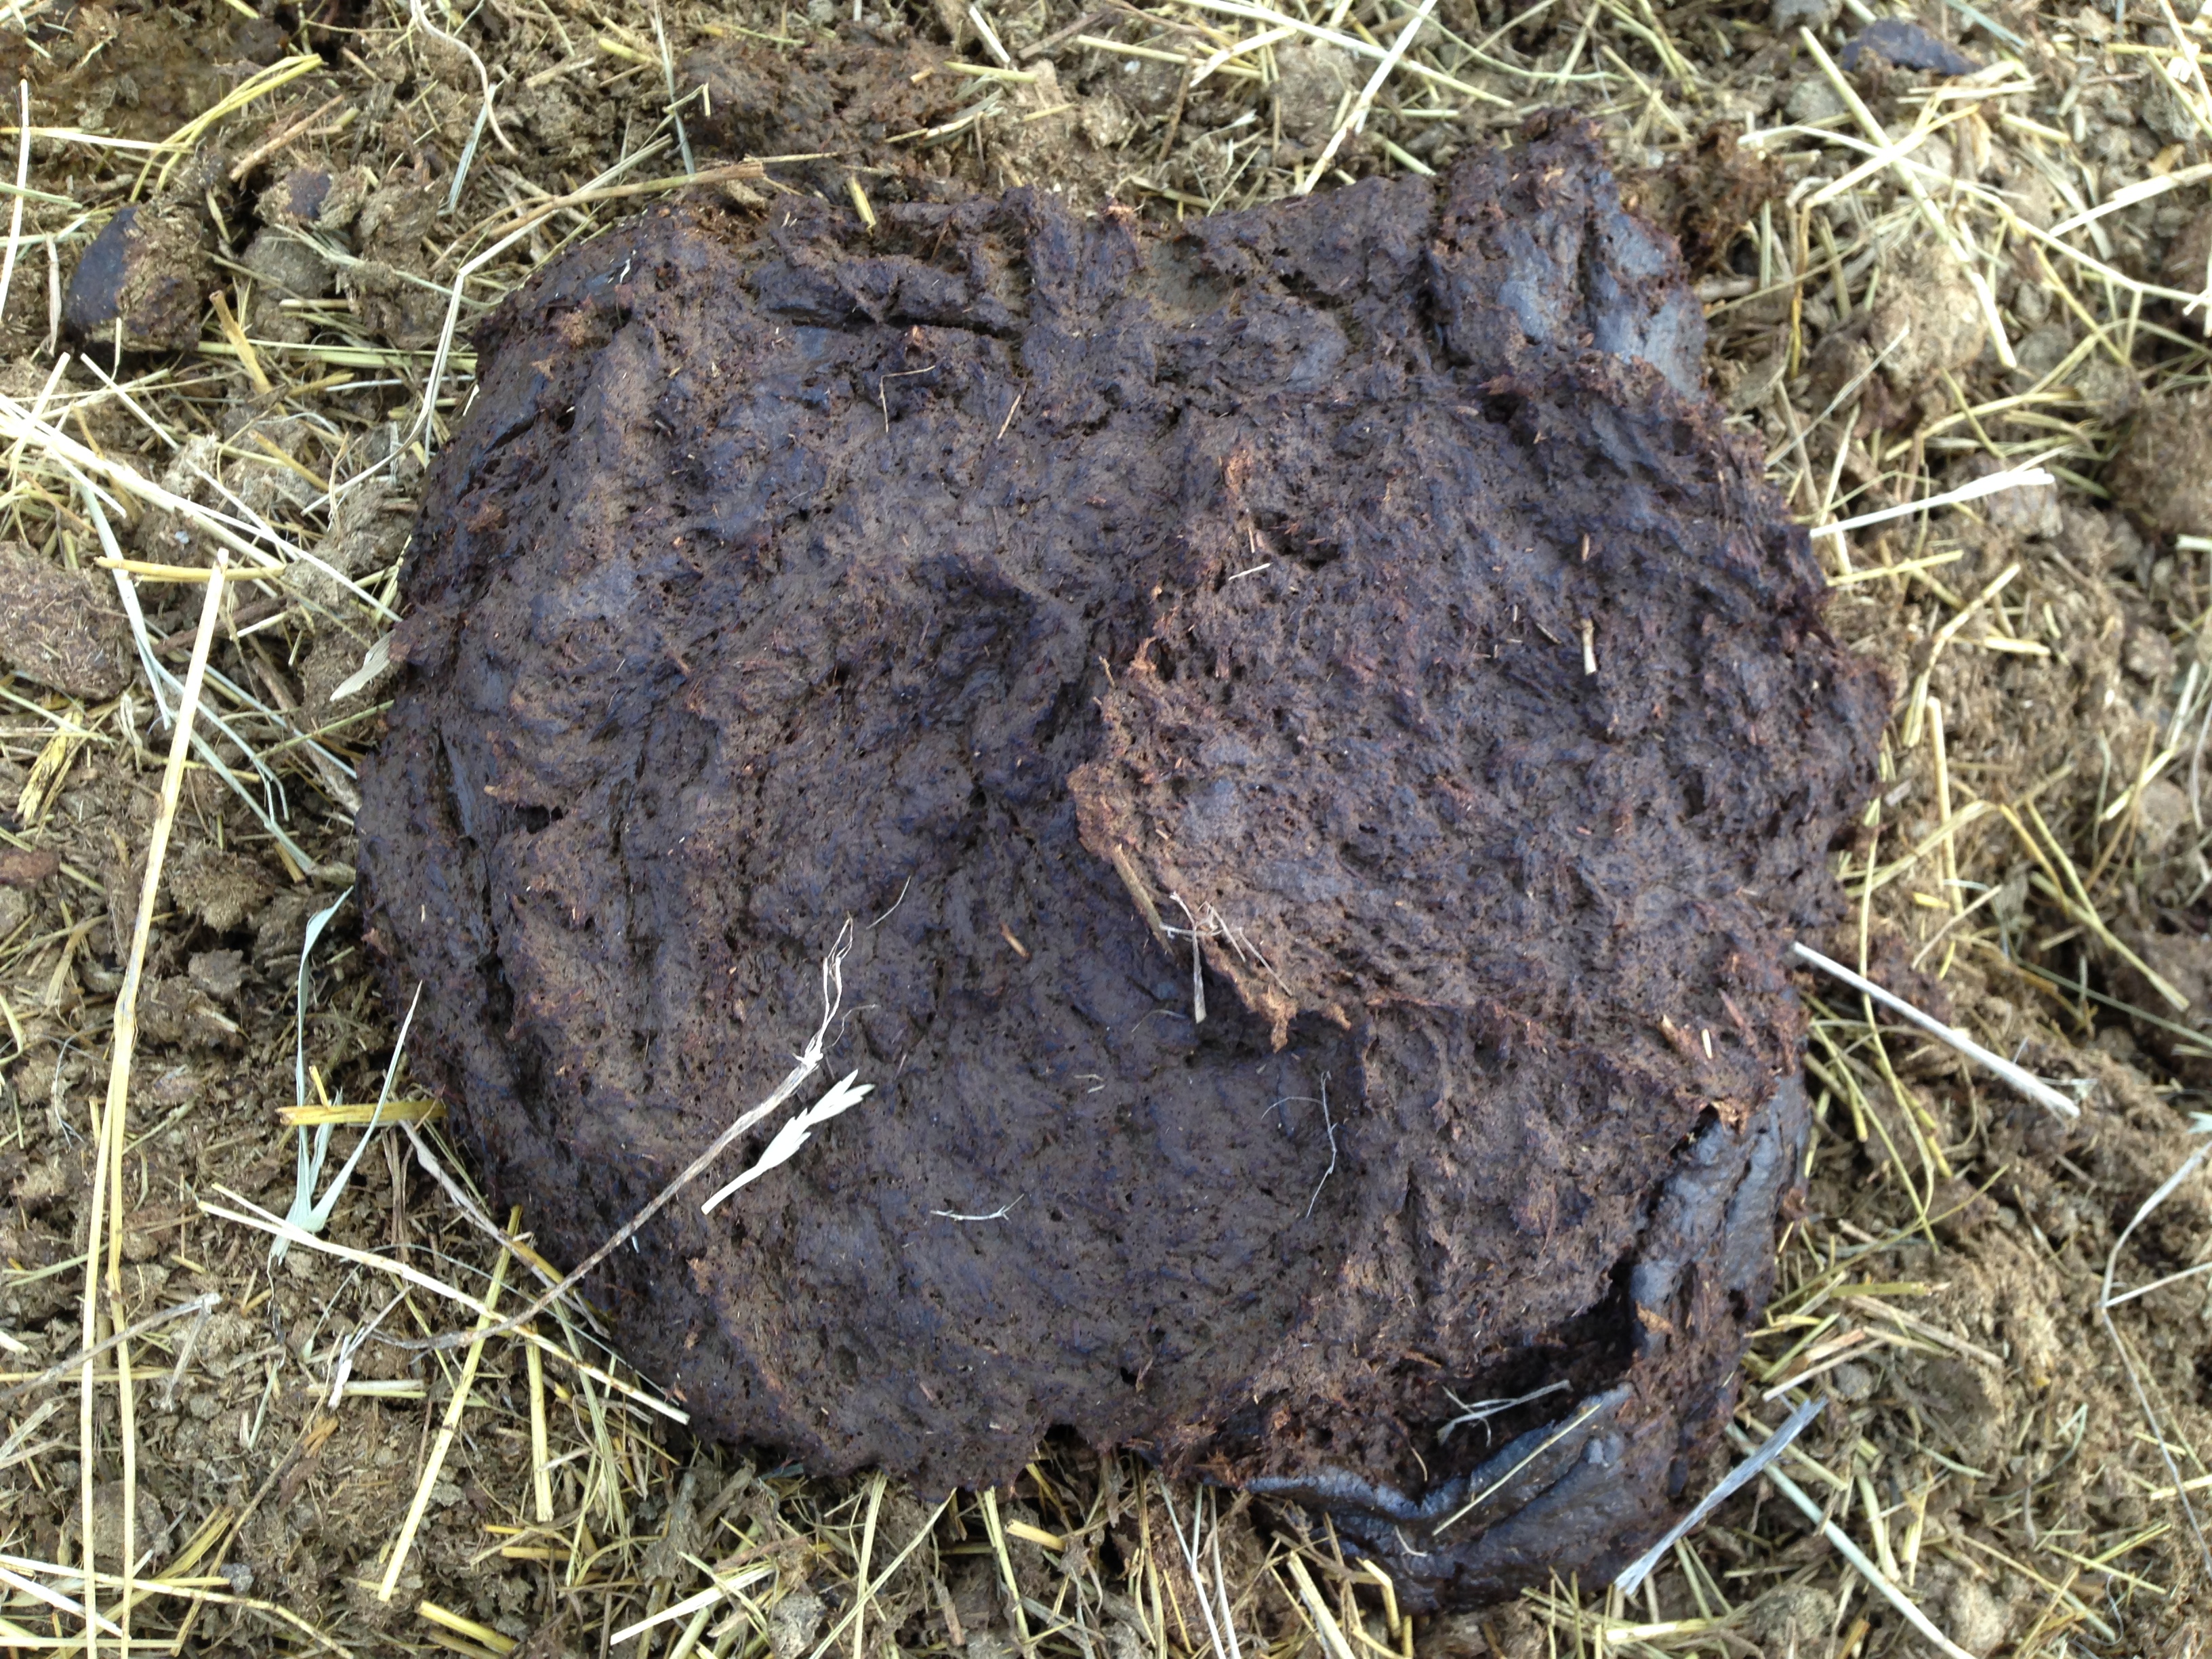 Cow manure patty that is soft and approximately 1 inch tall, with a concave center and no defining rings around the outer edges.